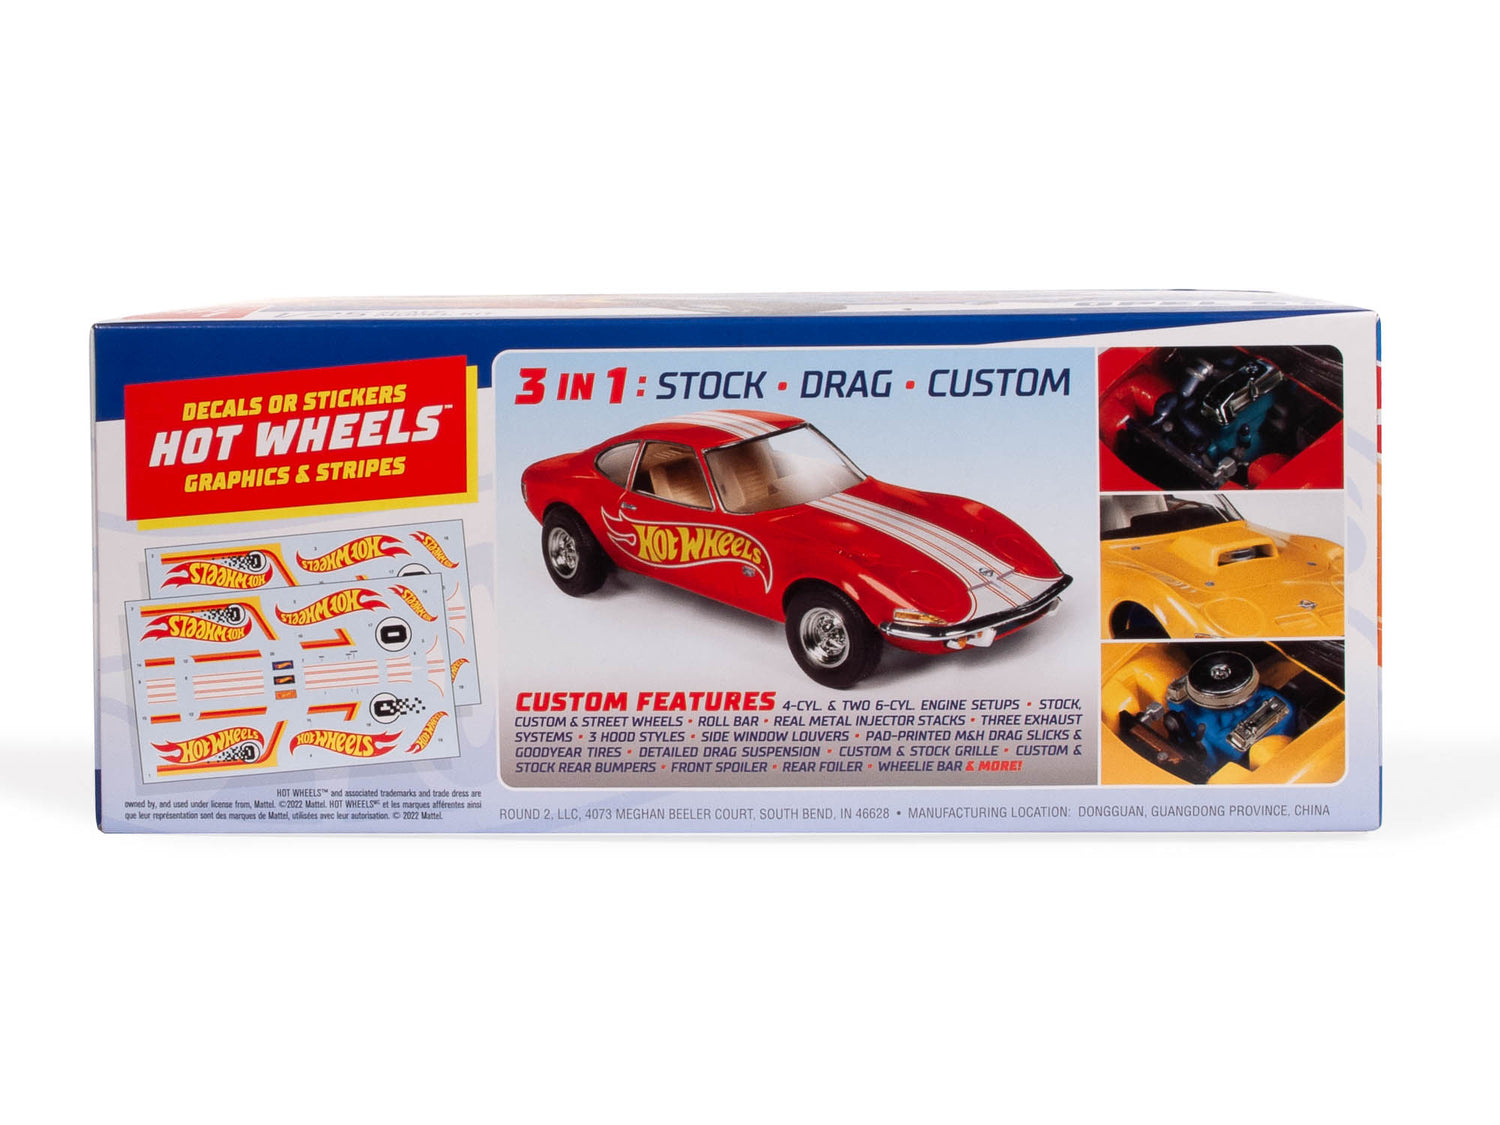 AMT Hot Wheels Buick Opel GT 1:25 Scale Model Kit decals